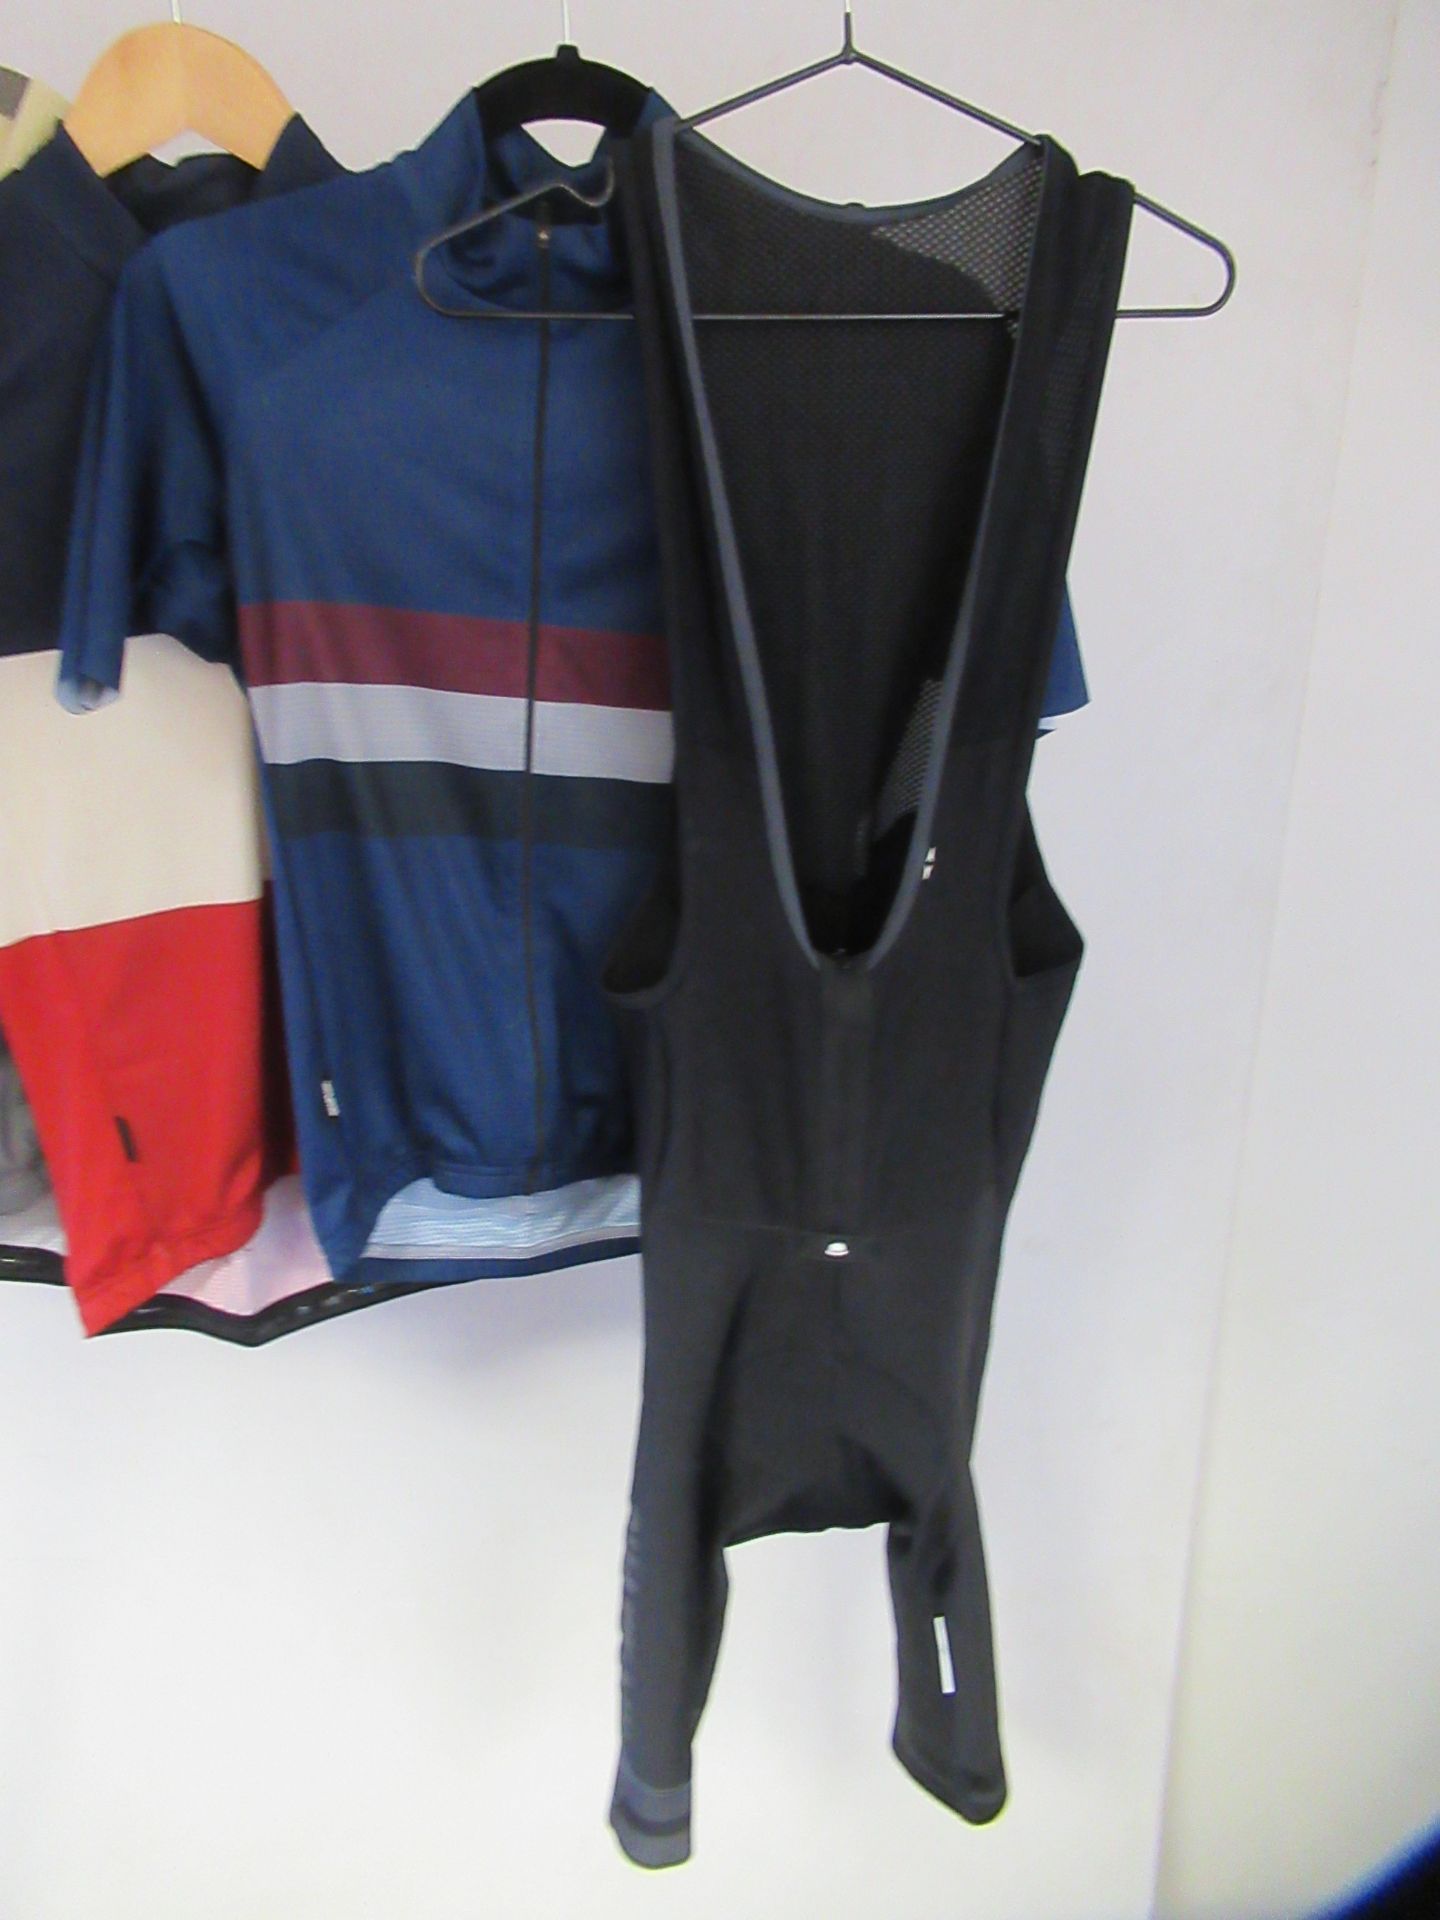 5x S Male Cycling Clothes - Image 2 of 6